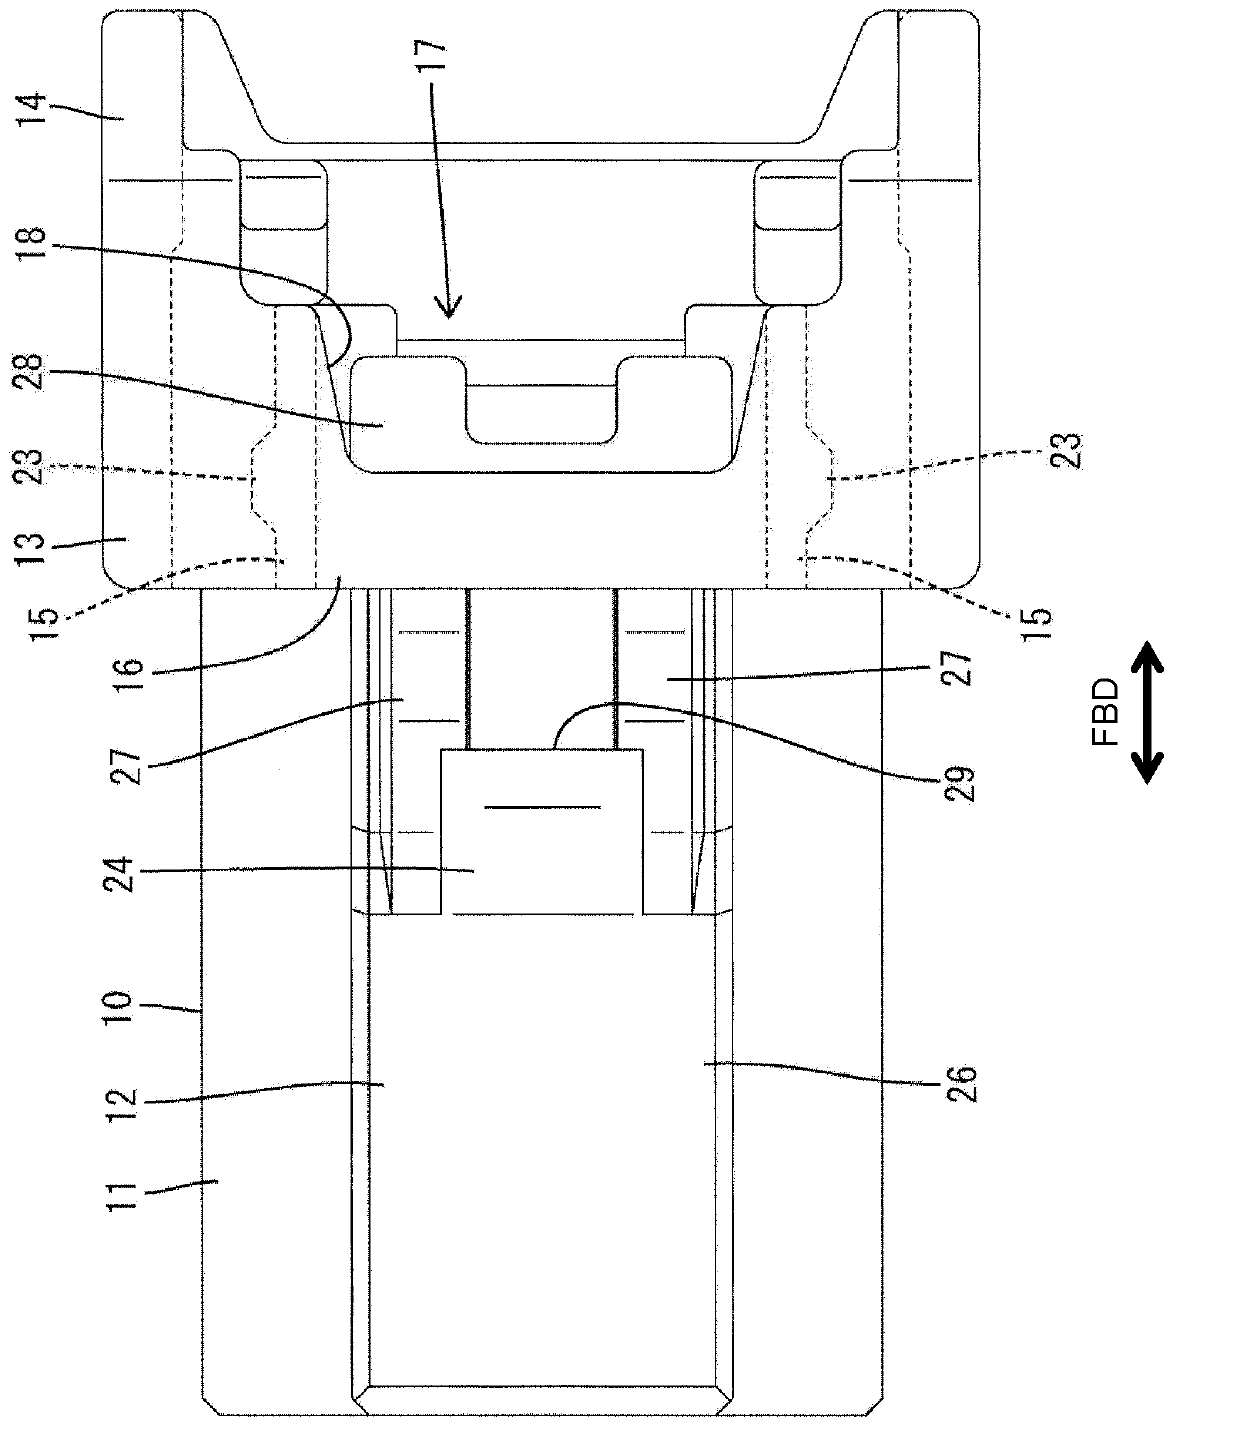 Connector, connector assembly and assembling method therefor